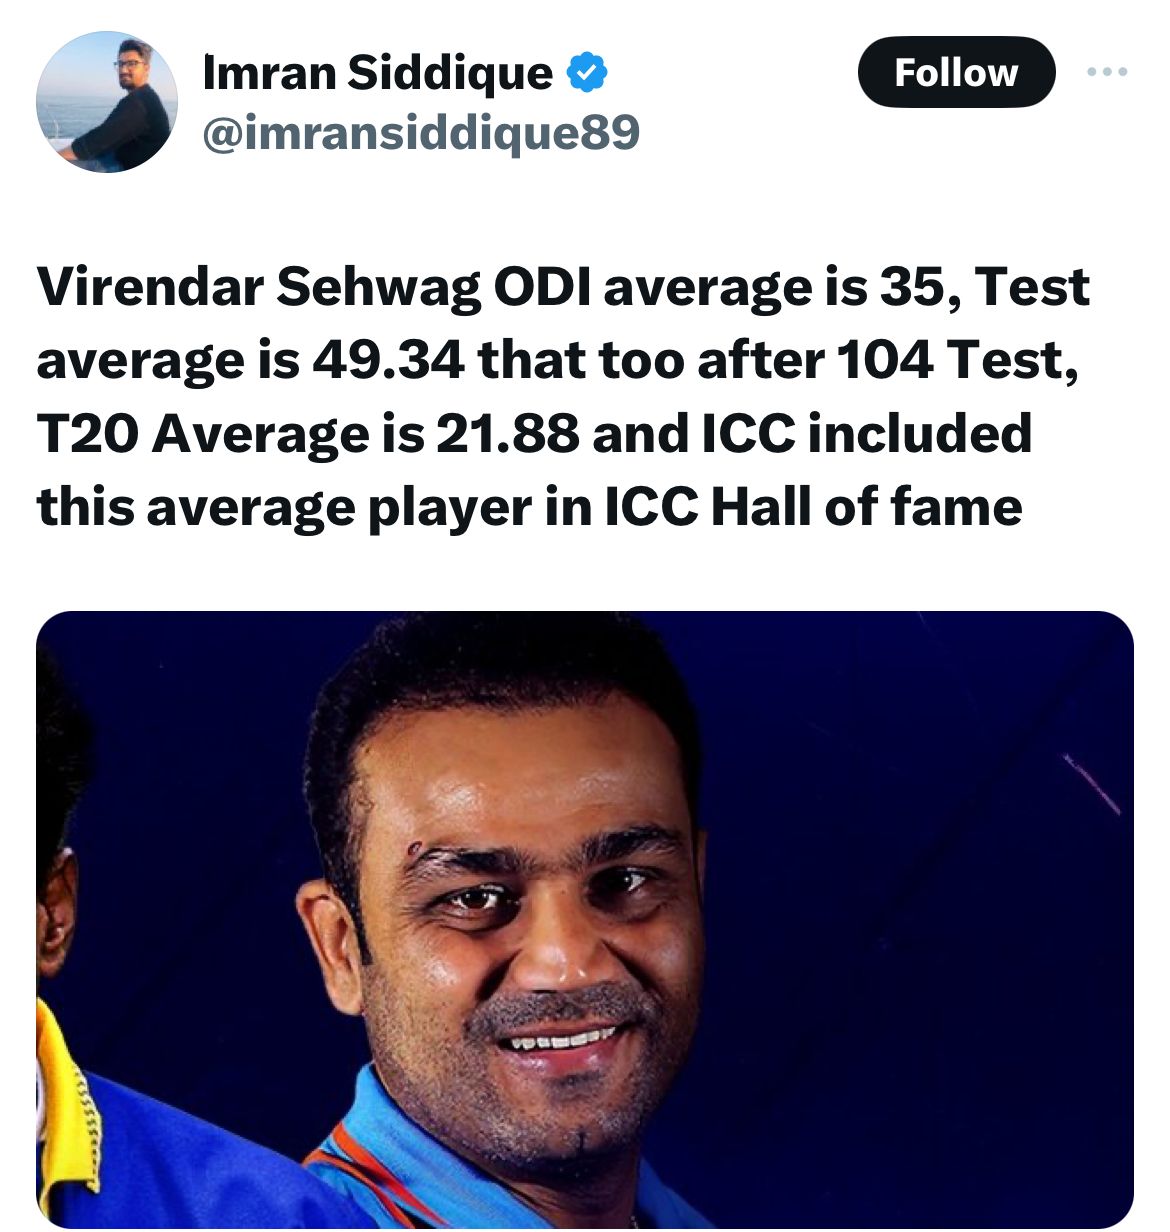 A Pakistani Said Virender Sehwag Is Average And Shouldn’t Be Included In ICC Hall Of Fame